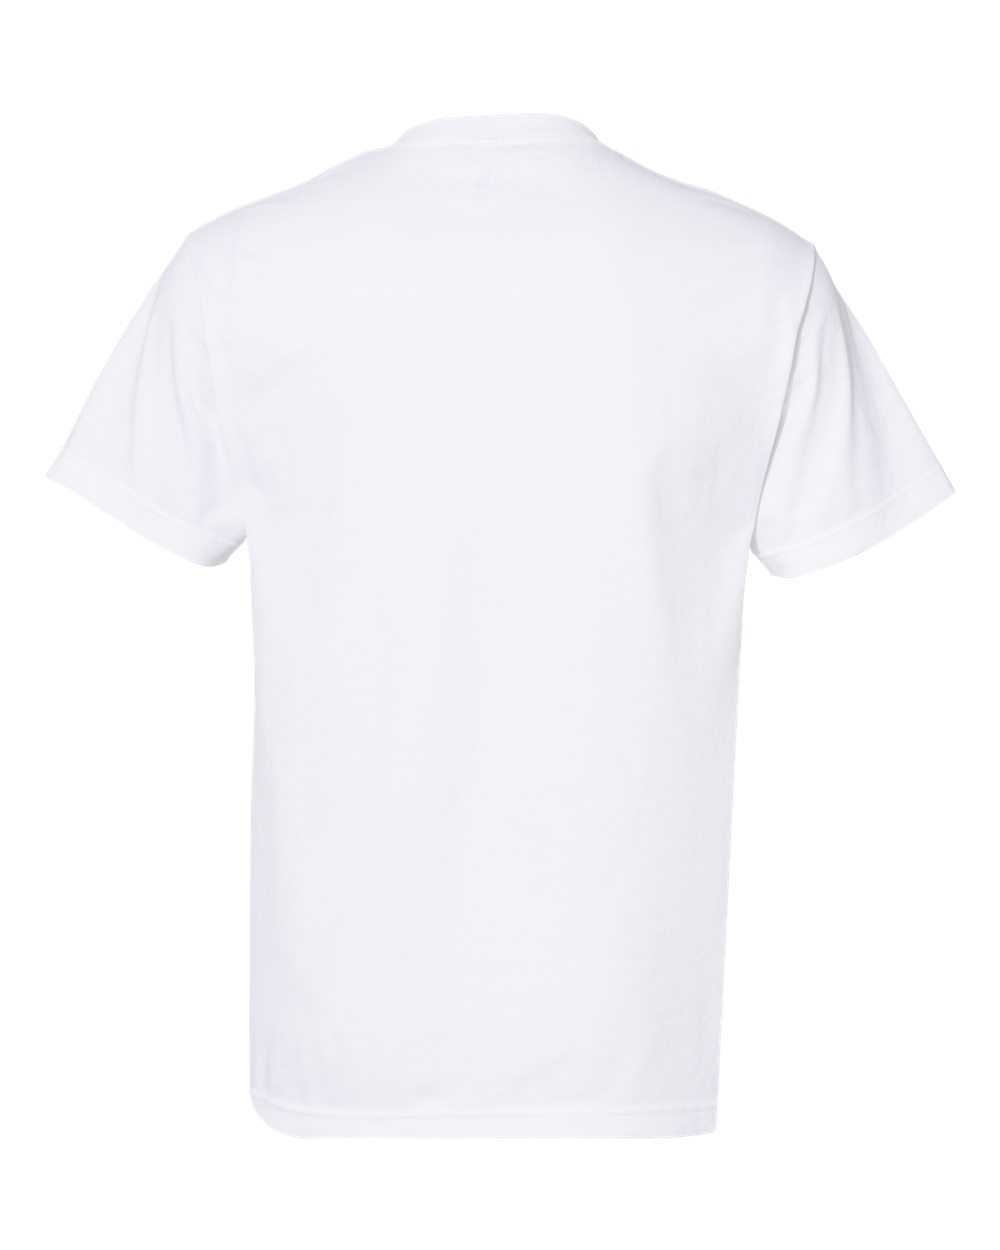 American Apparel 1301 Unisex Heavyweight Cotton T-Shirt - White - HIT a Double